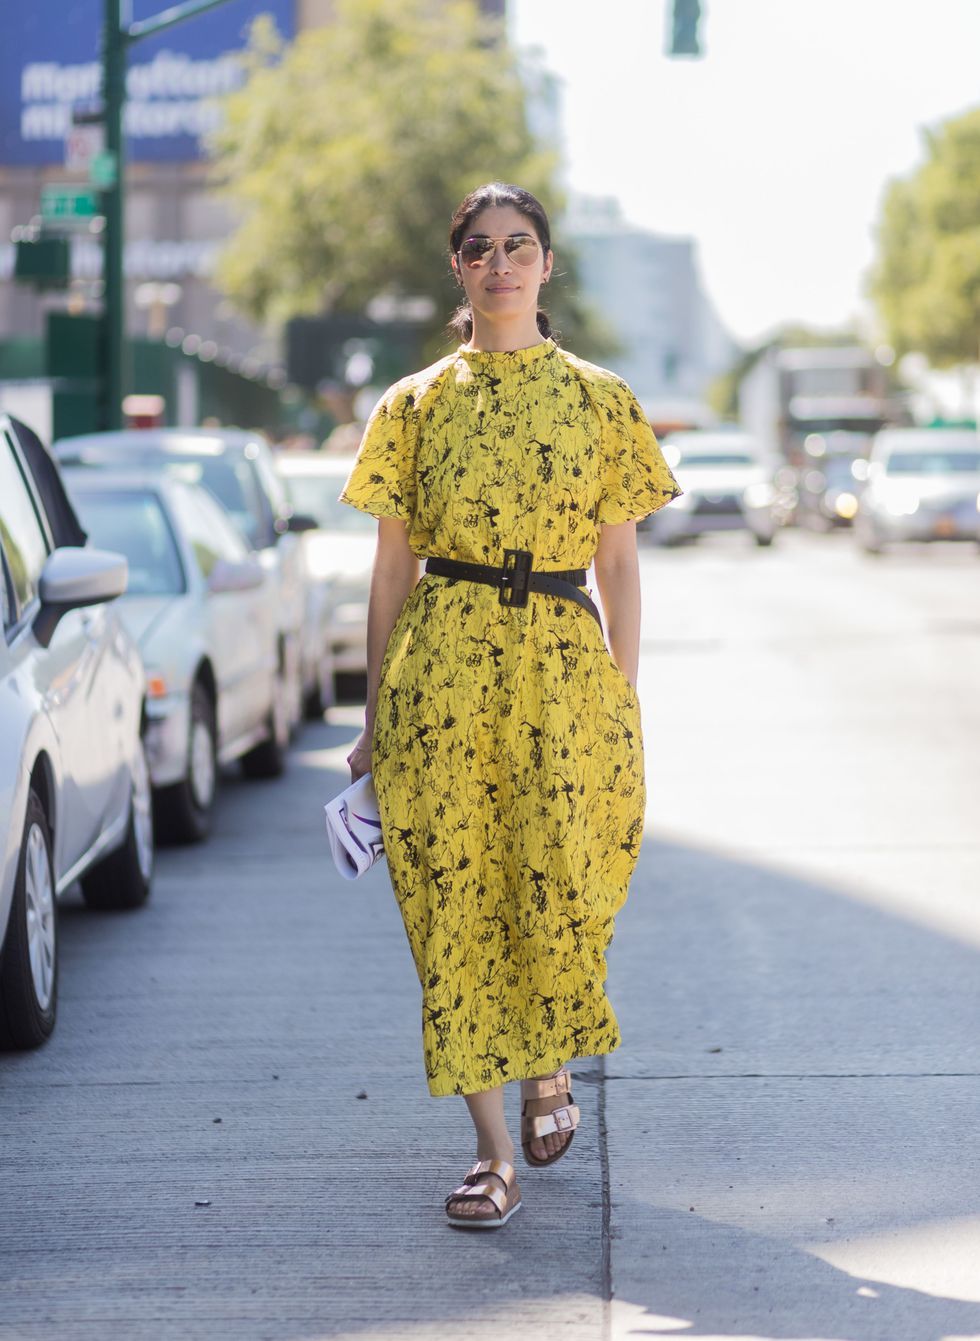 NEW YORK, NY - SEPTEMBER 13: Caroline Issa wearing yellow dress seen in the streets of Manhattan outside Delpozo during New York Fashion Week on September 13, 2017 in New York City. (Photo by Christian Vierig/Getty Images)